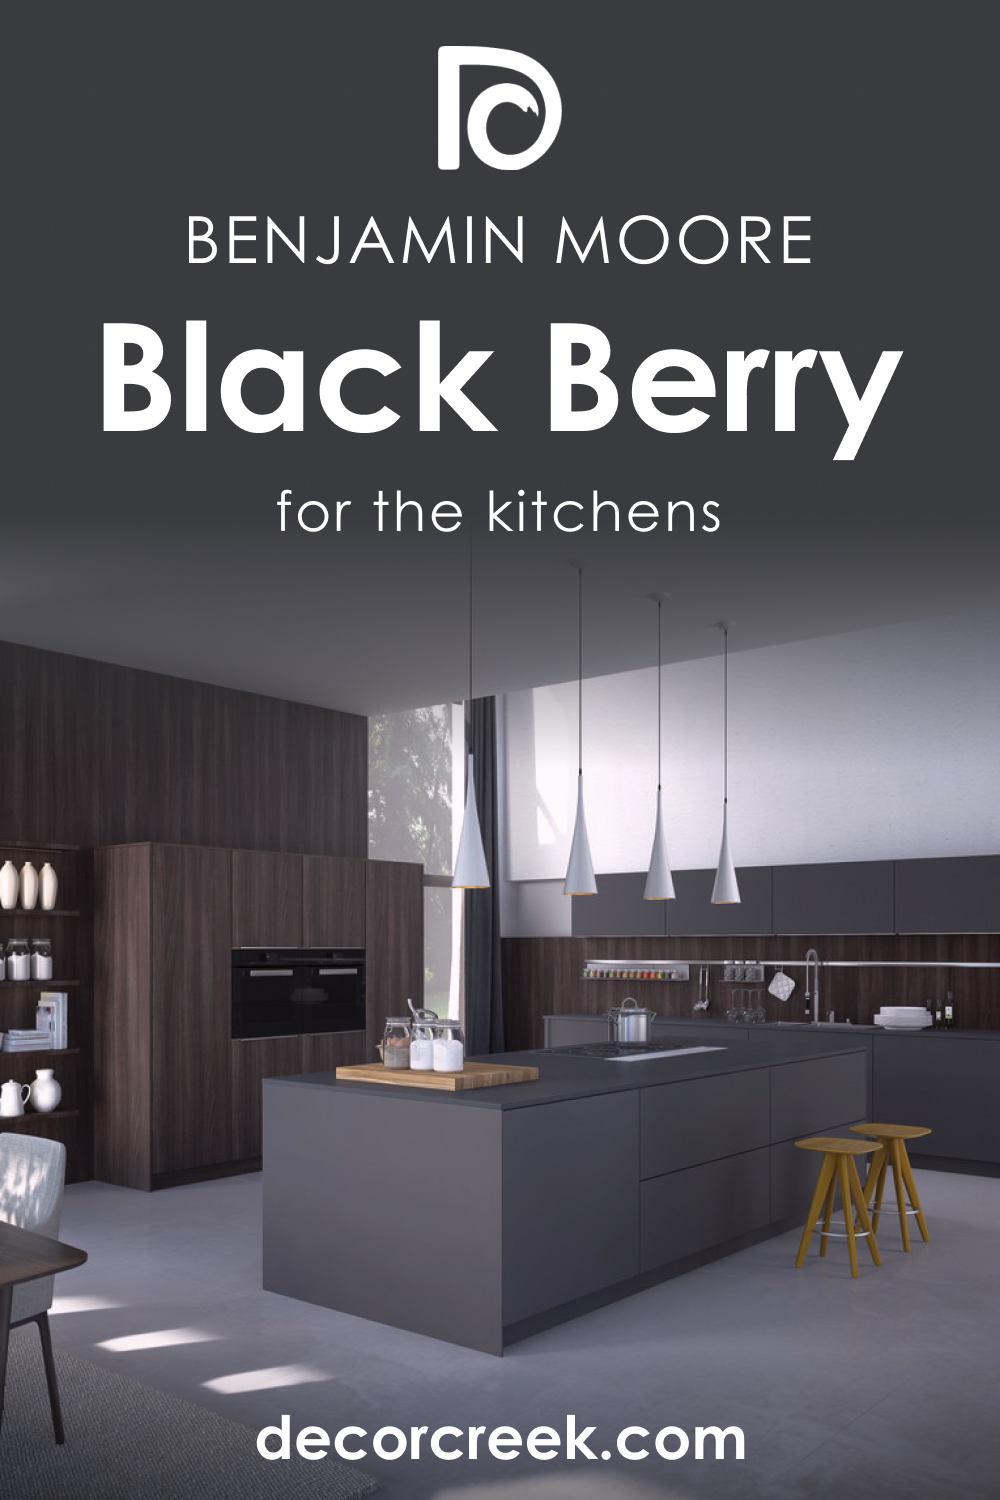 How to Use Black Berry 2119-20 in the Kitchen?